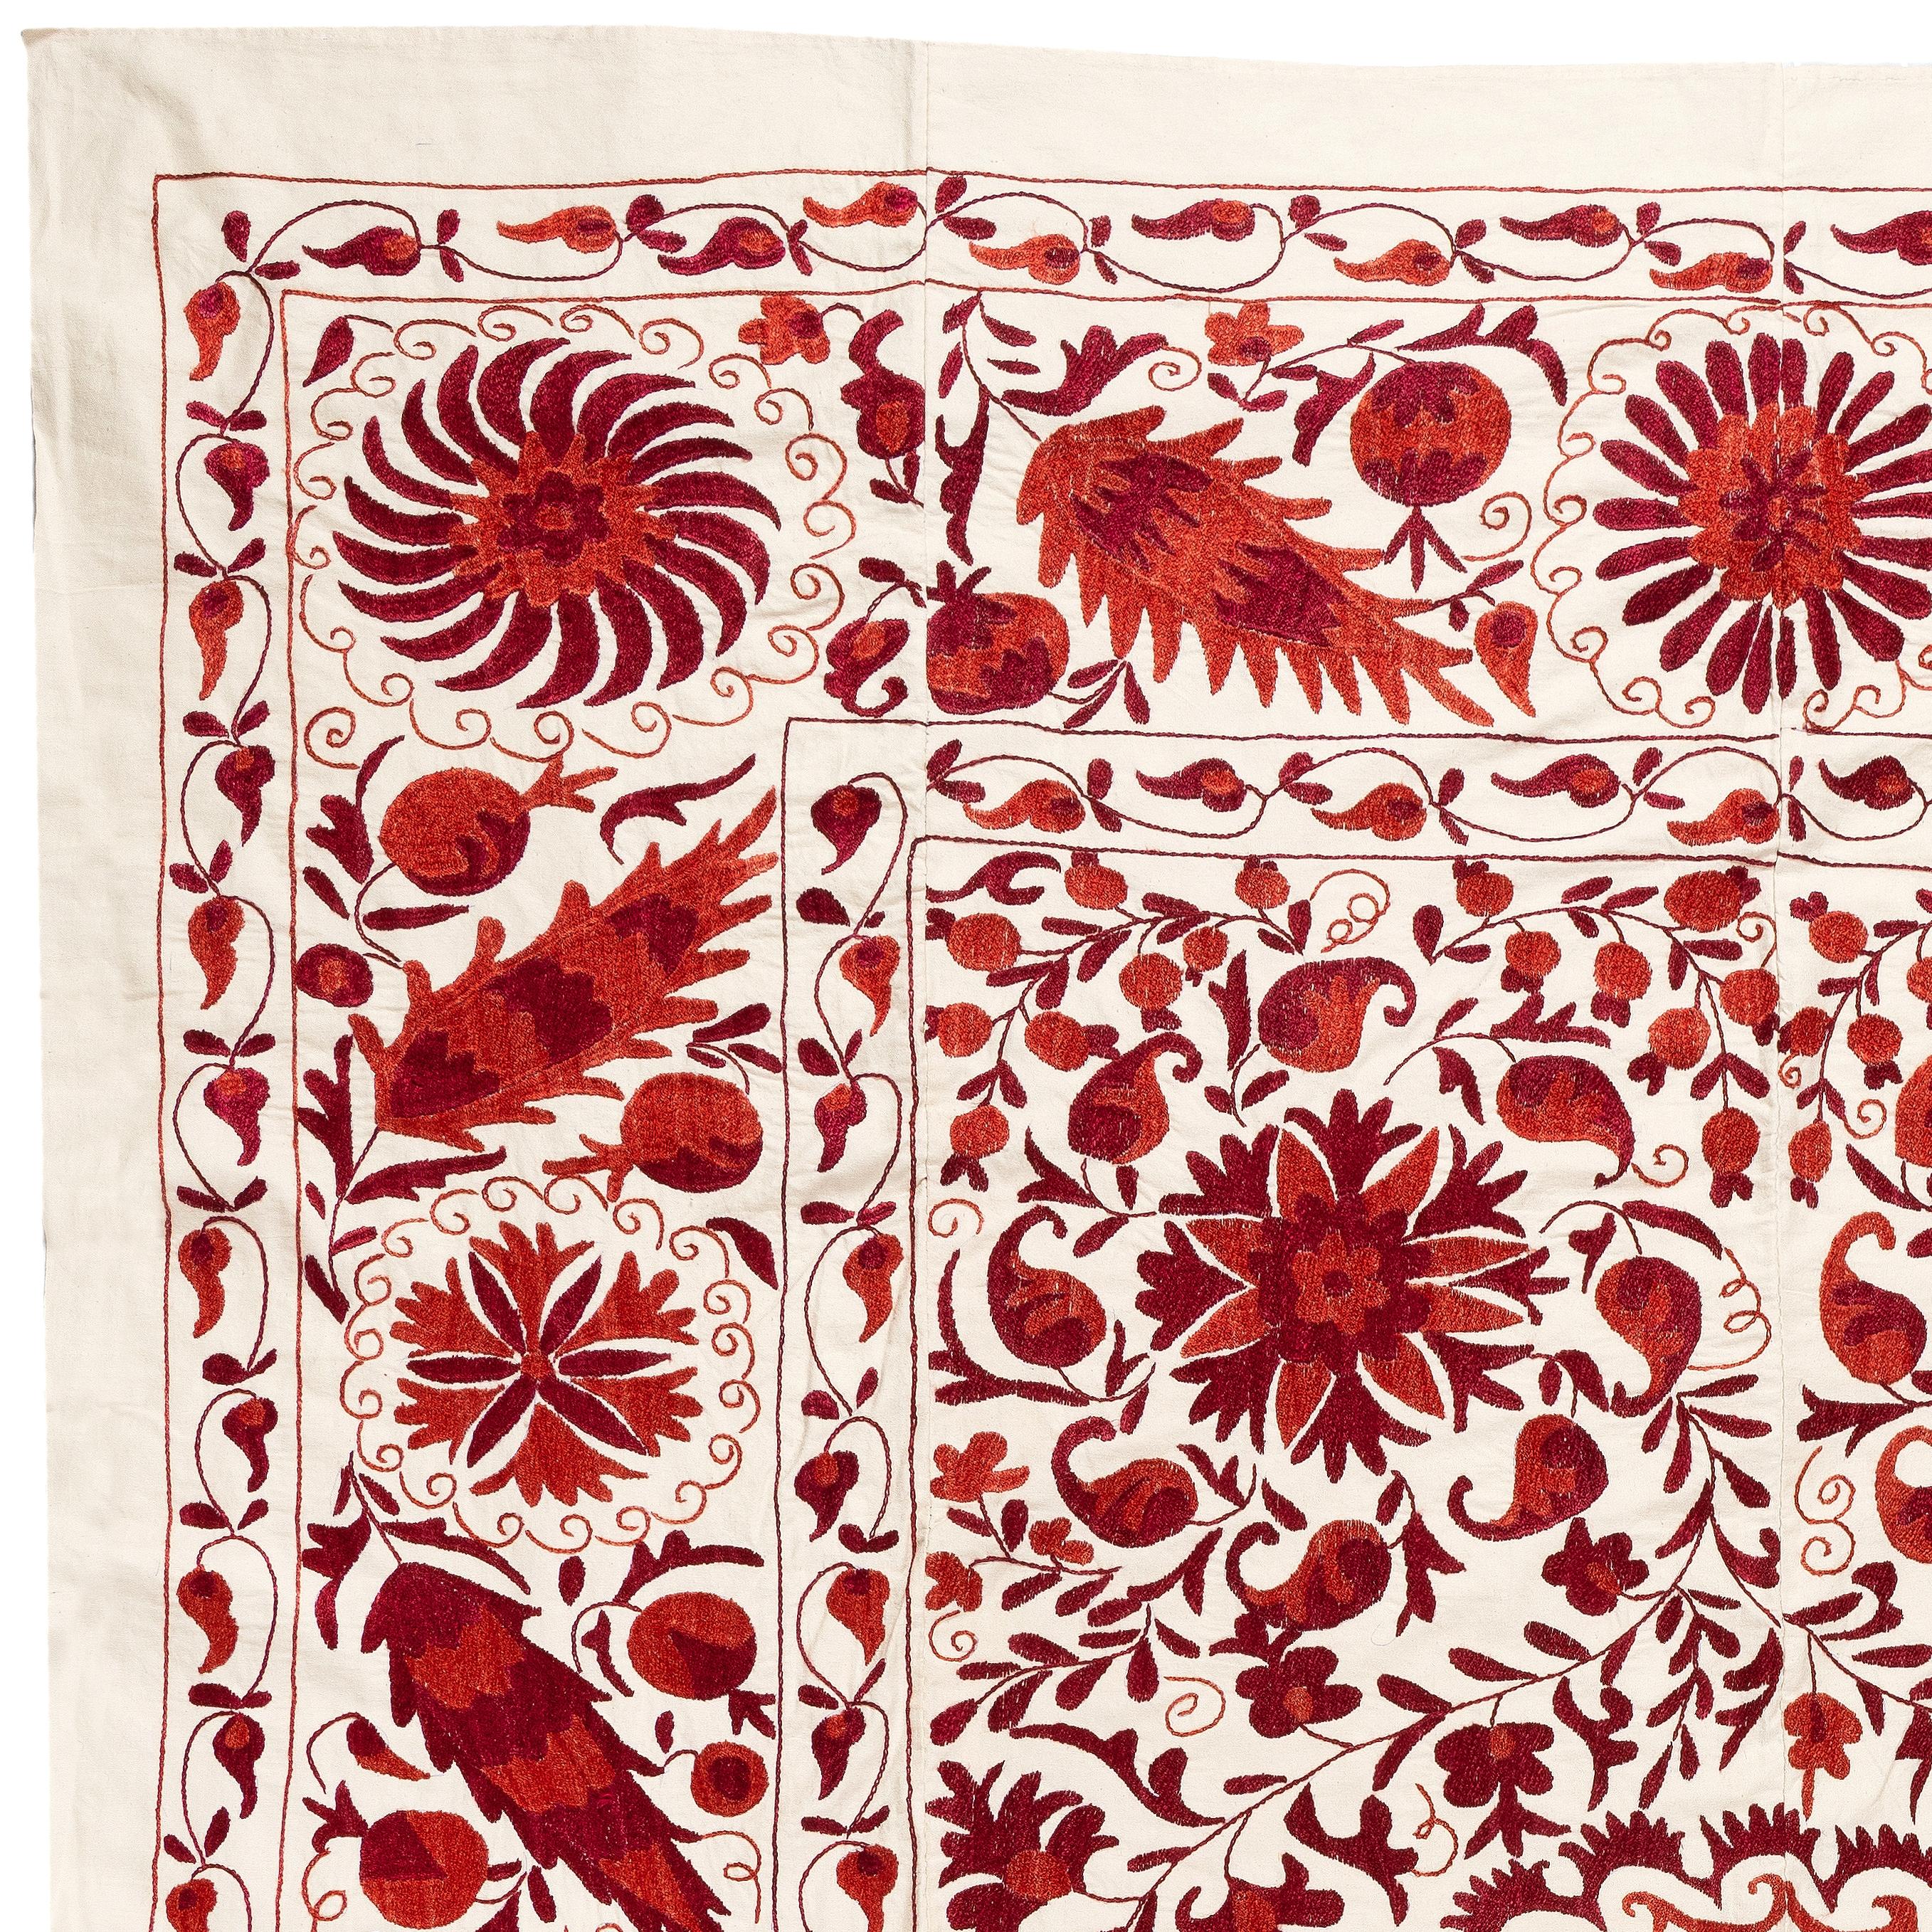 Uzbek 6.3x8 Ft Silk Embroidery Bed Cover in Red & Ivory, Handmade Suzani Wall Hanging